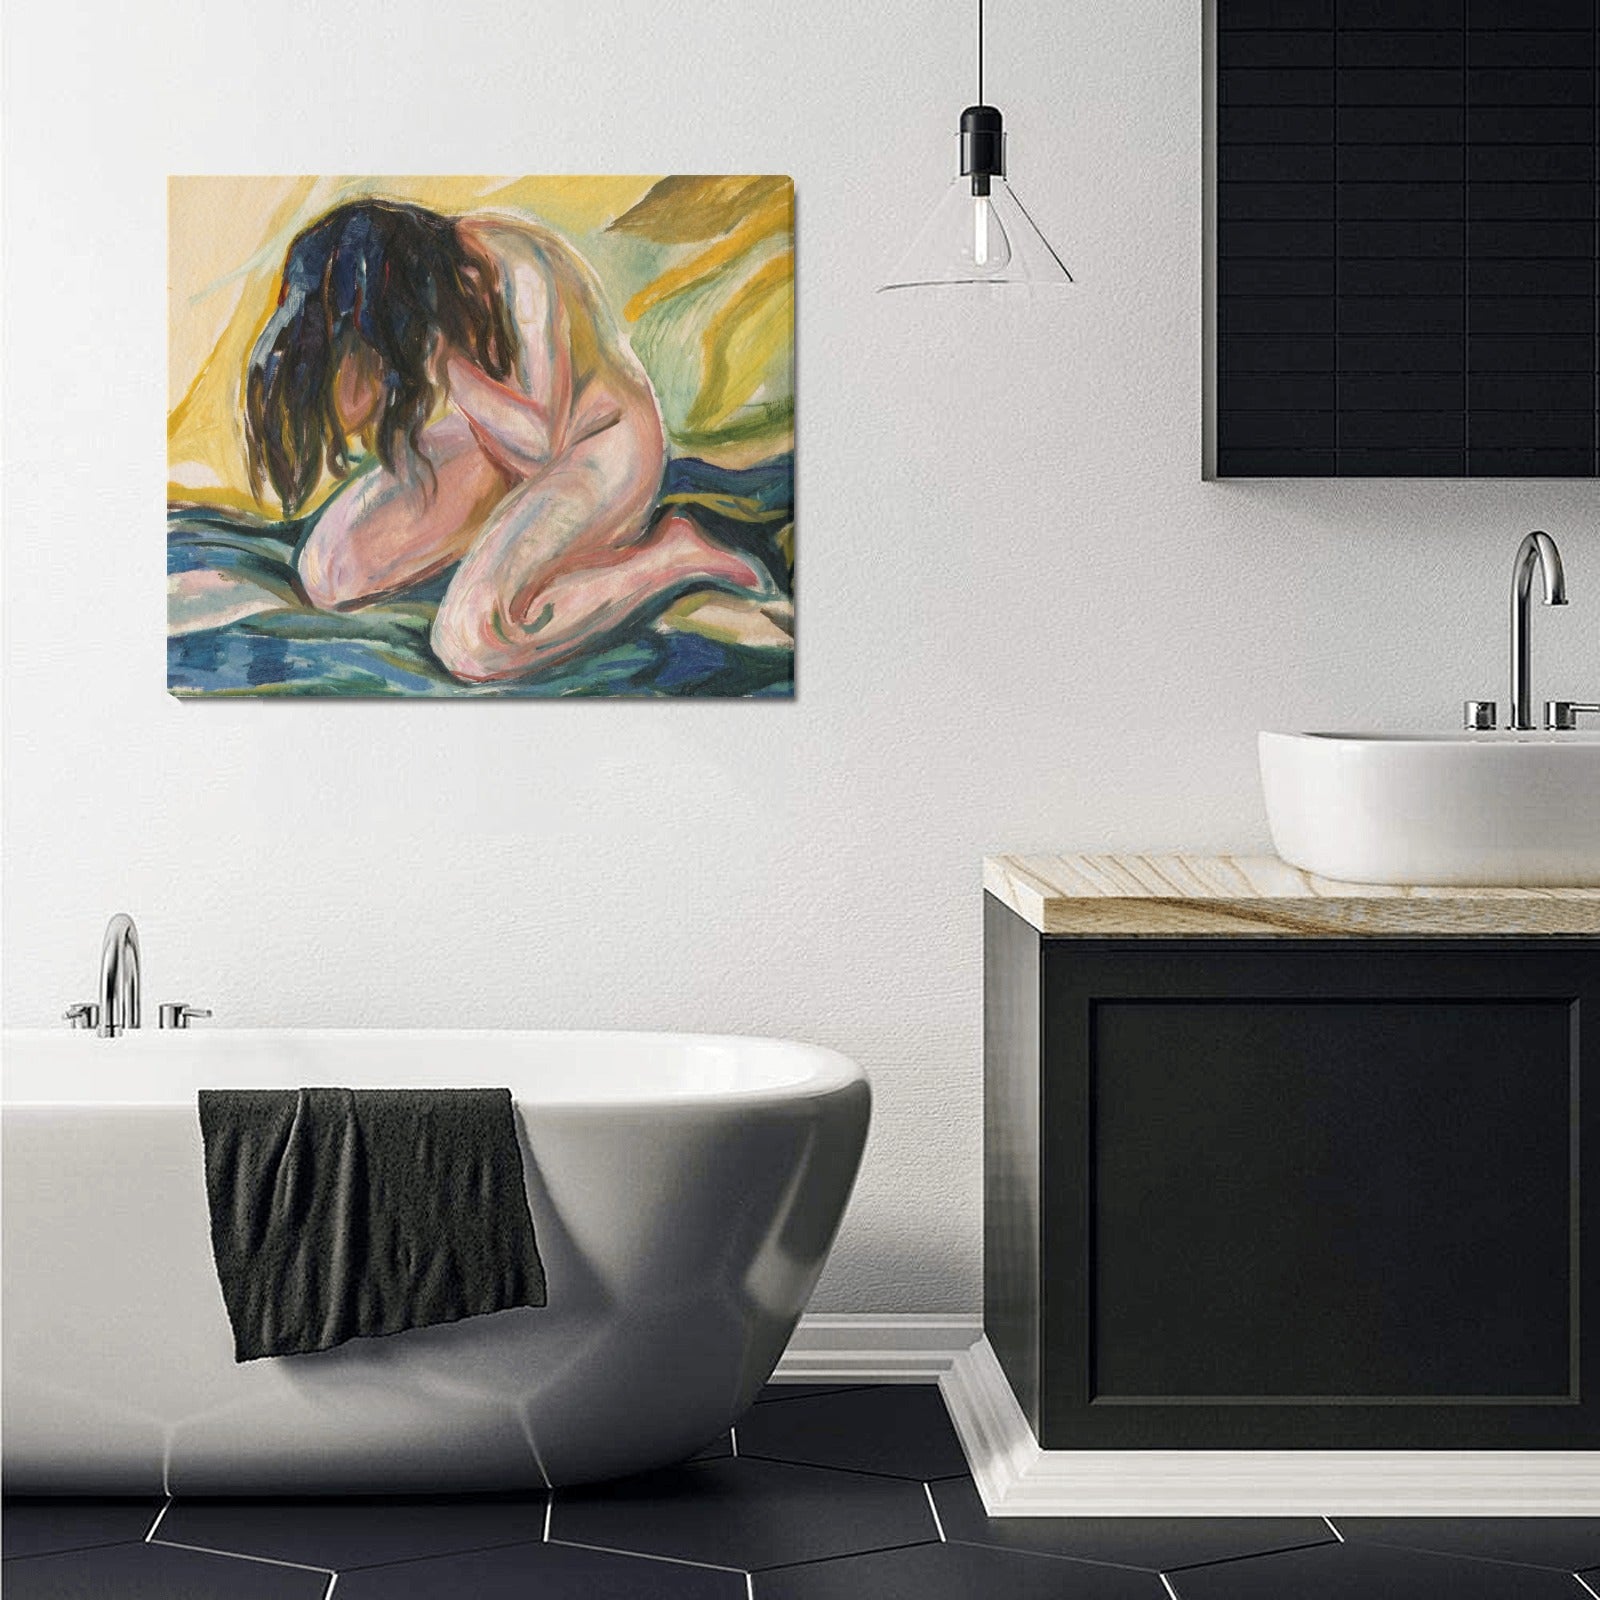 EDVARD MUNCH - WEEPING NUDE (1919) - CANVAS PRINT 24"x 20"